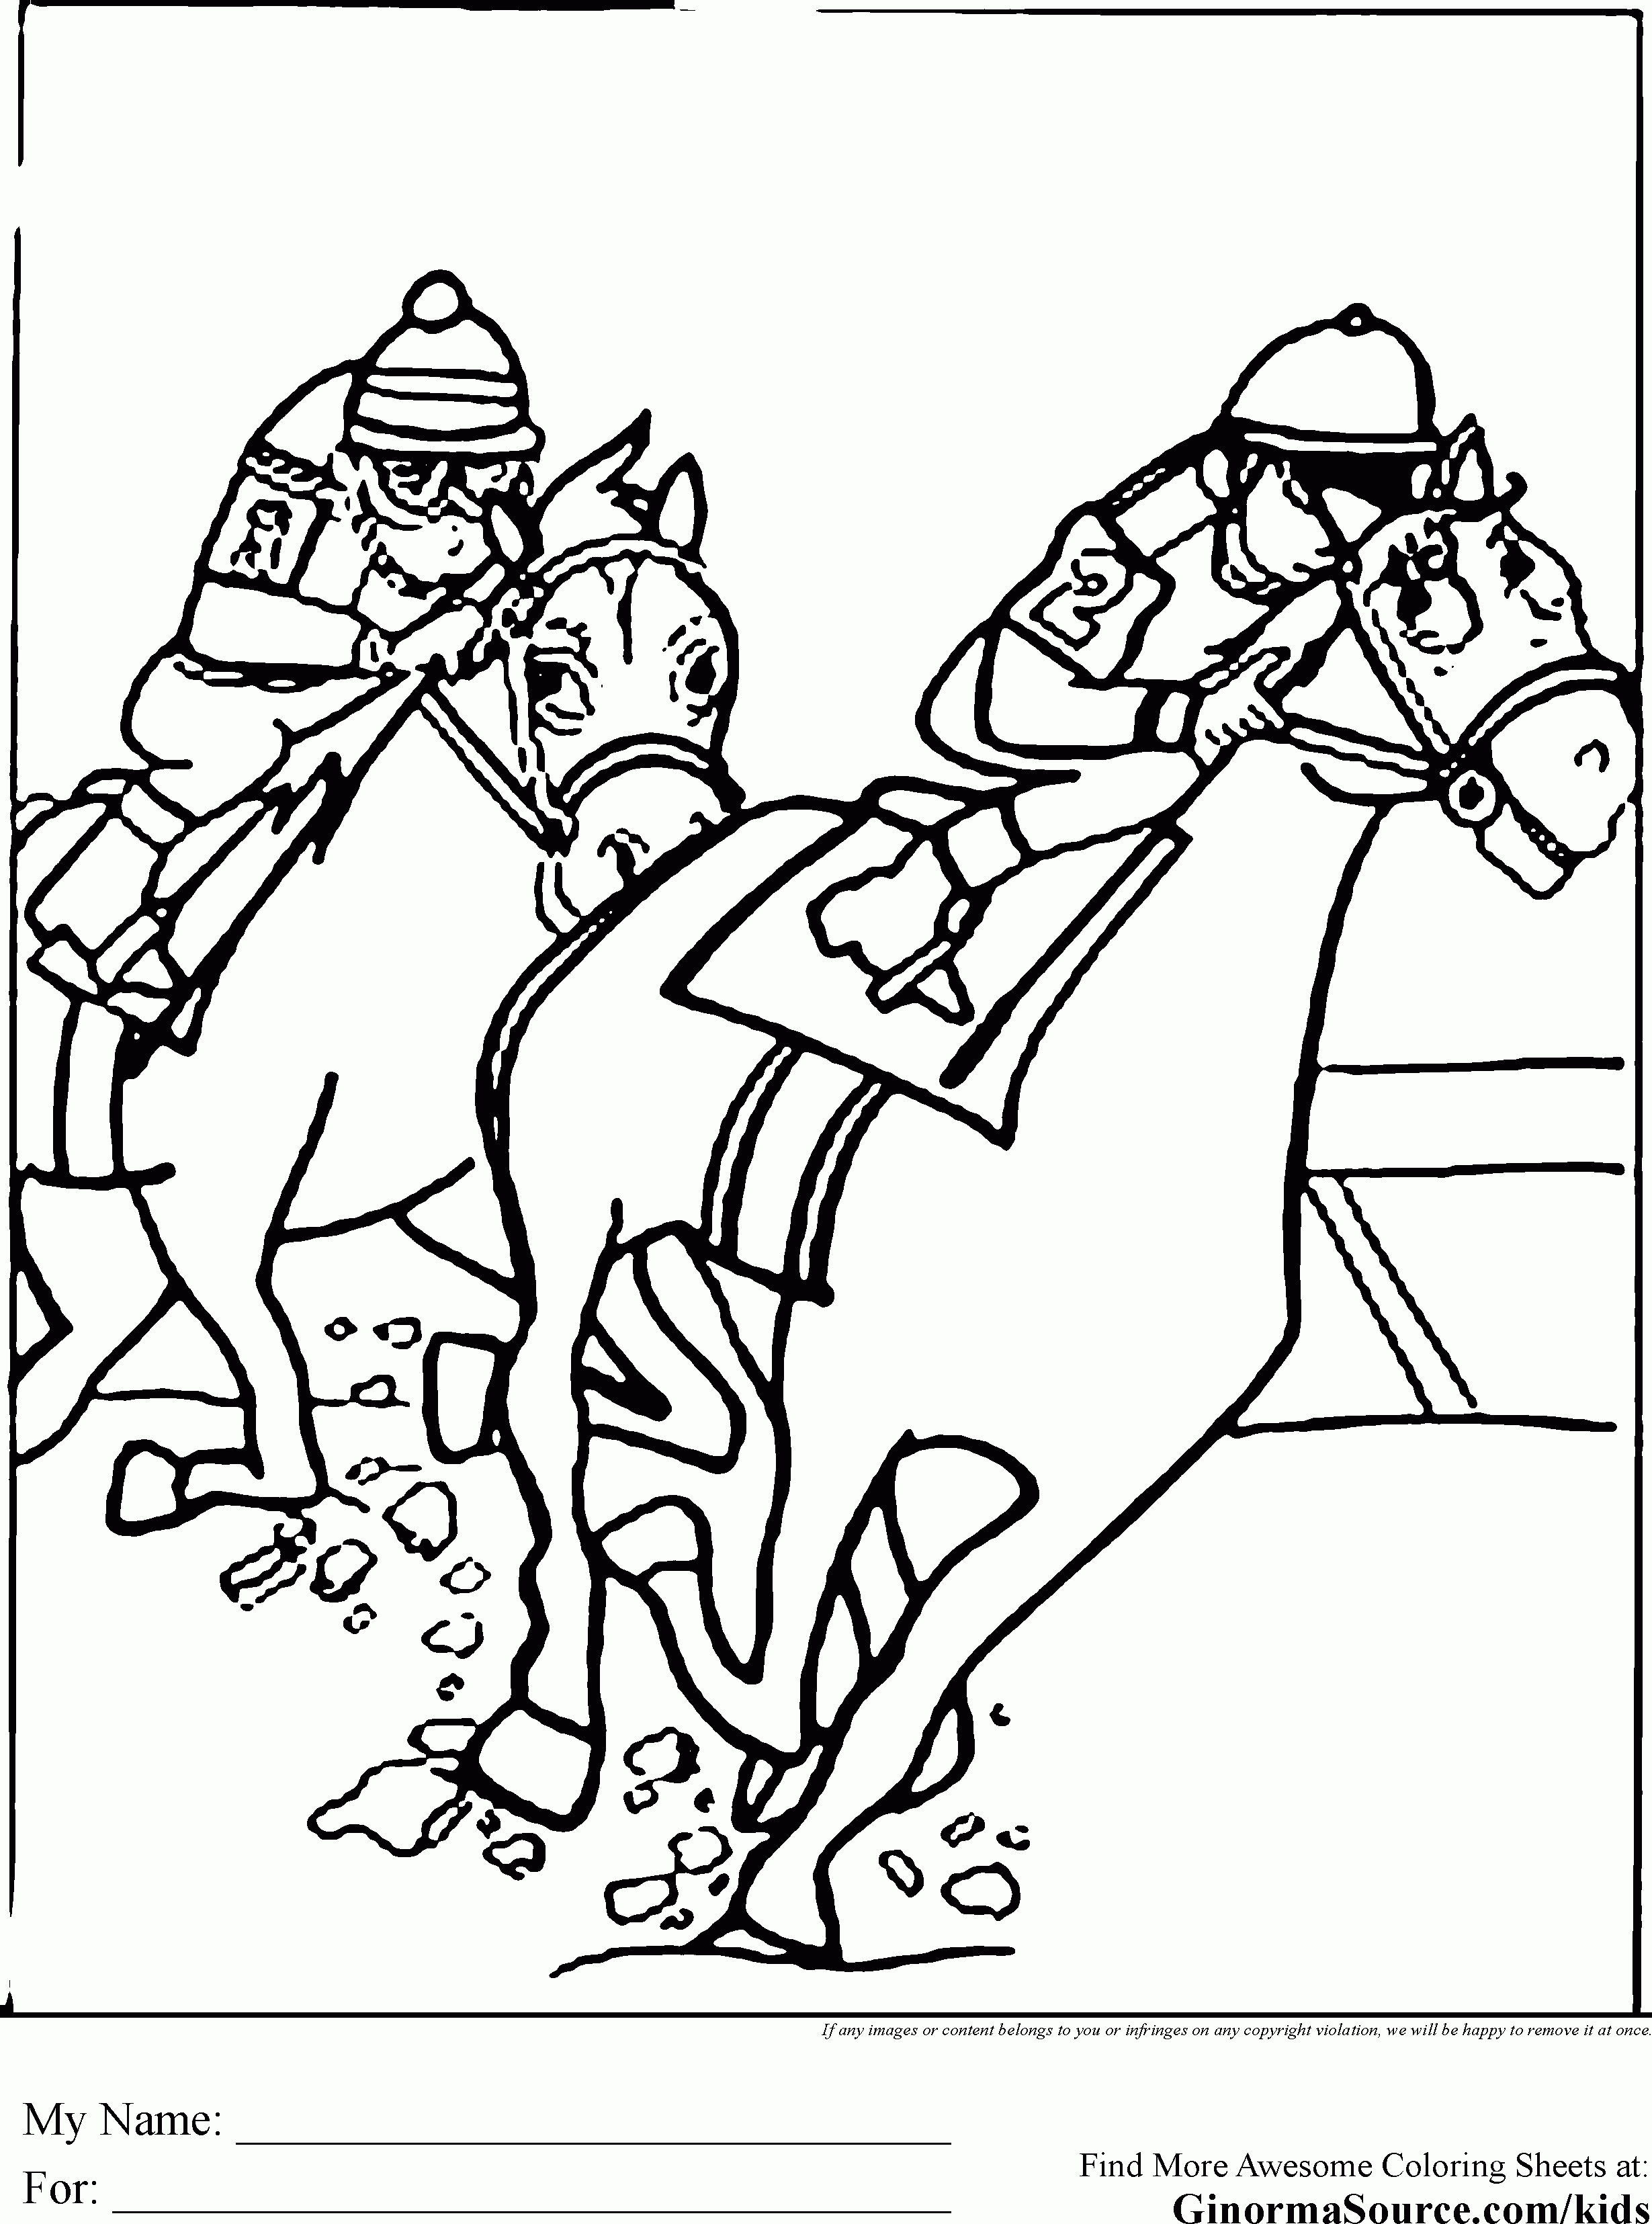 Coloring Pages Of Racing Horses - Coloring